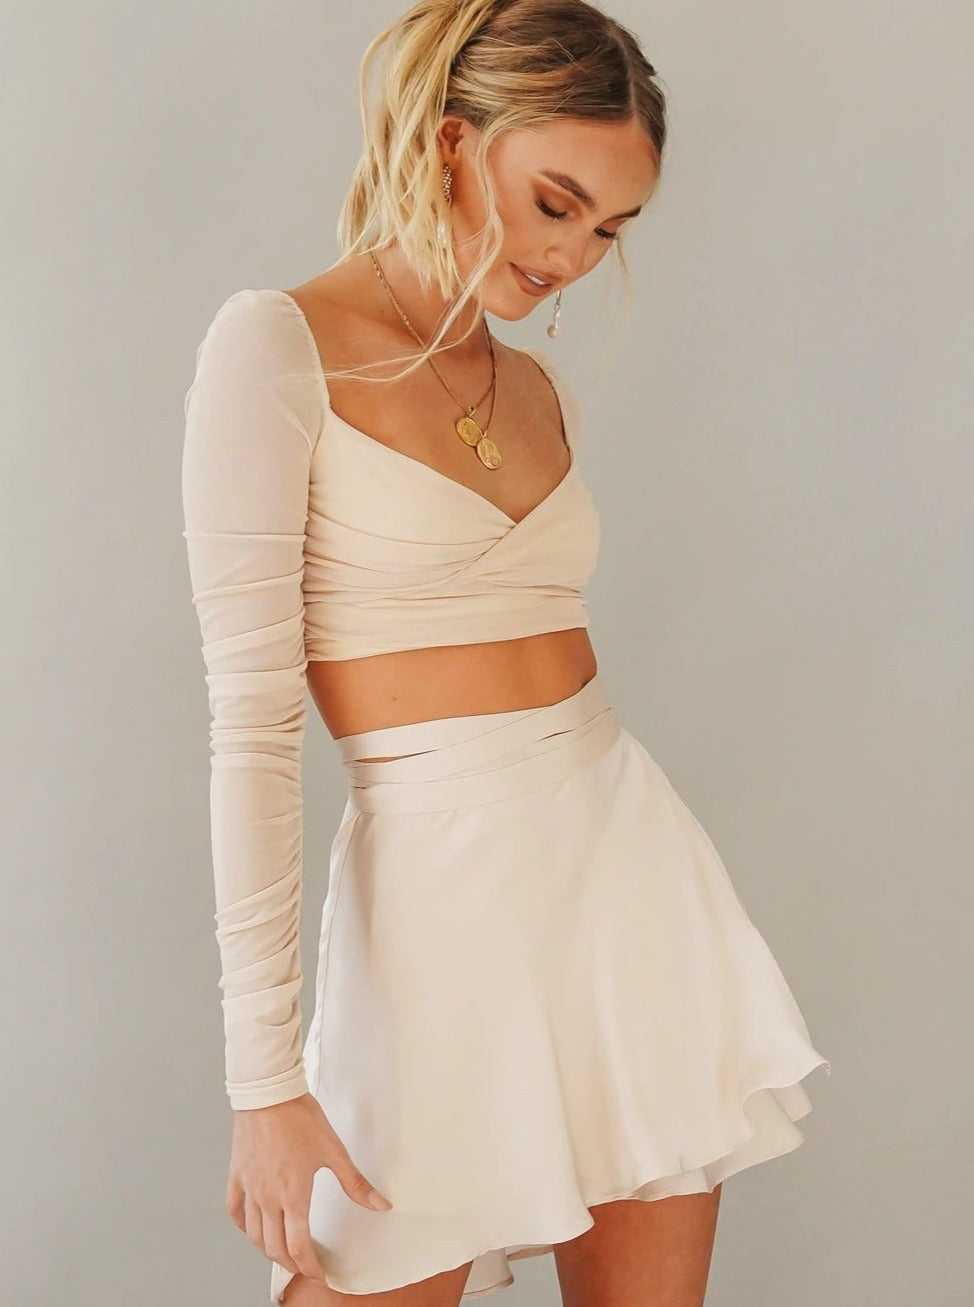 White One Piece Lace-Up High Waist Wrap Skirt